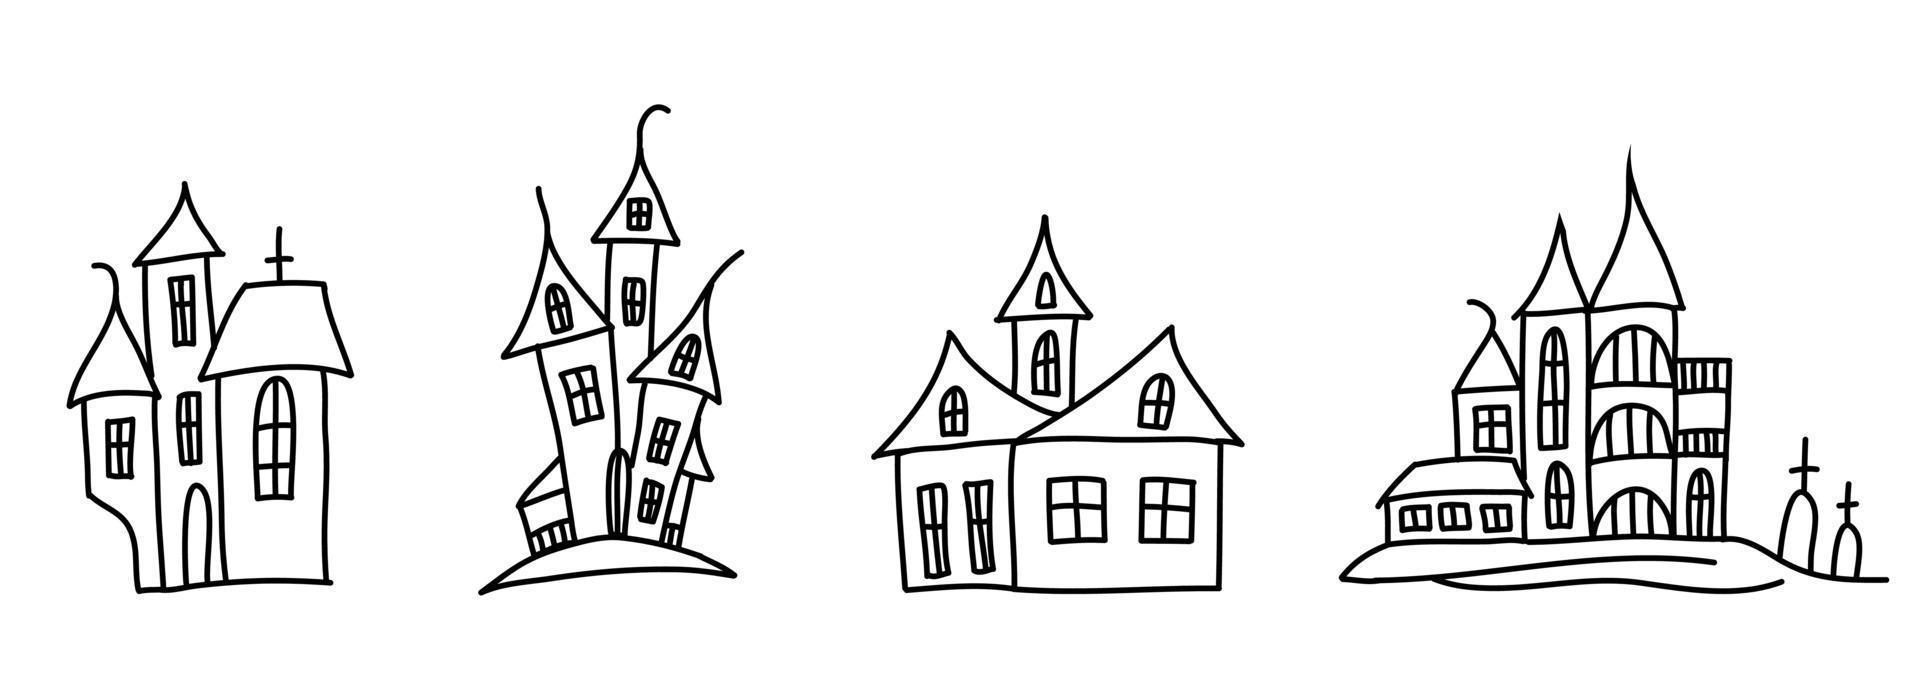 Silhouettes of scary houses in doodle style. vector